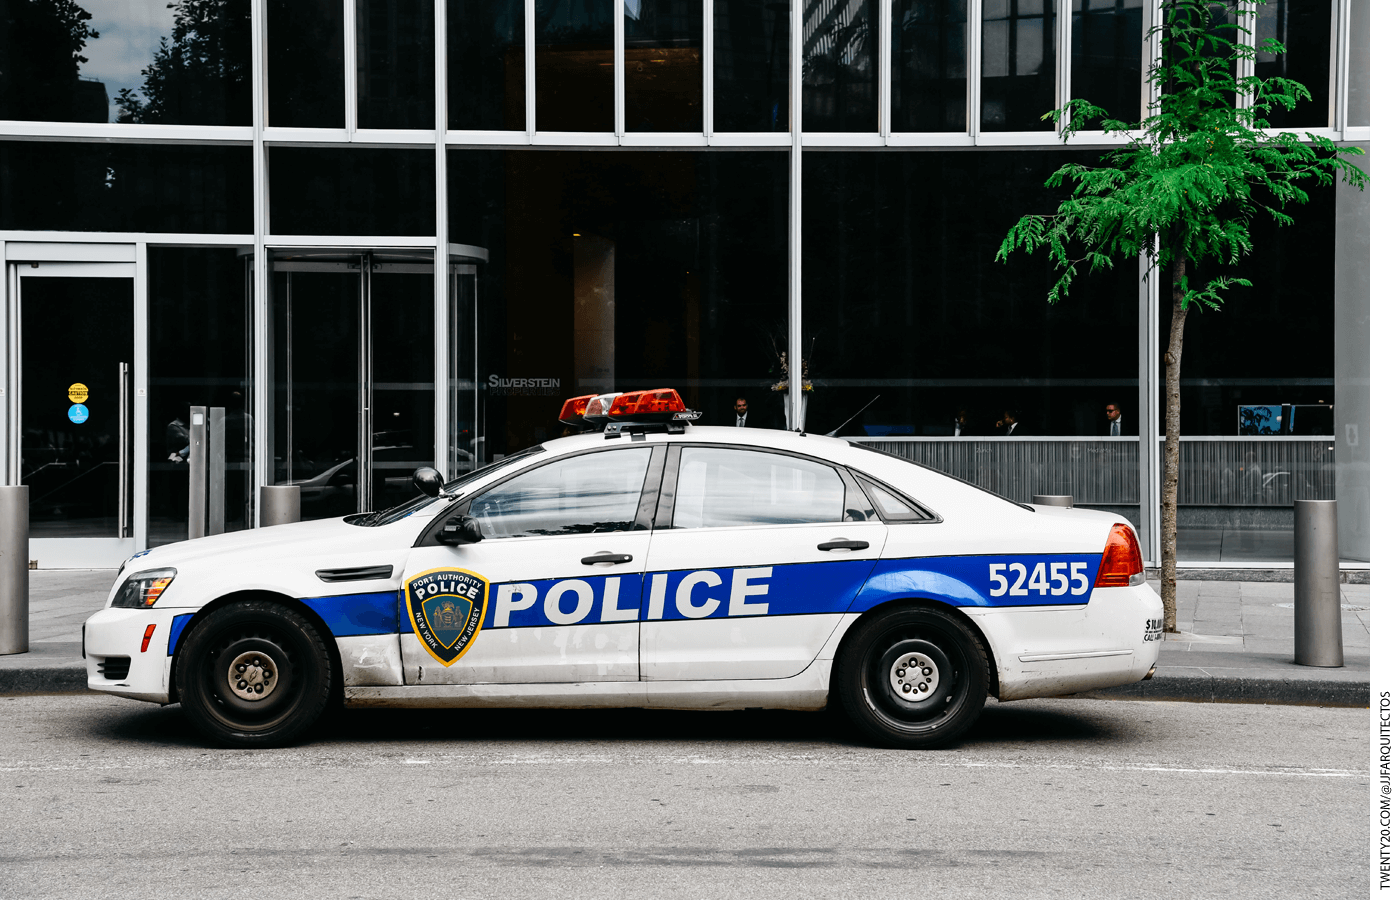 A police car parked in front of an office building